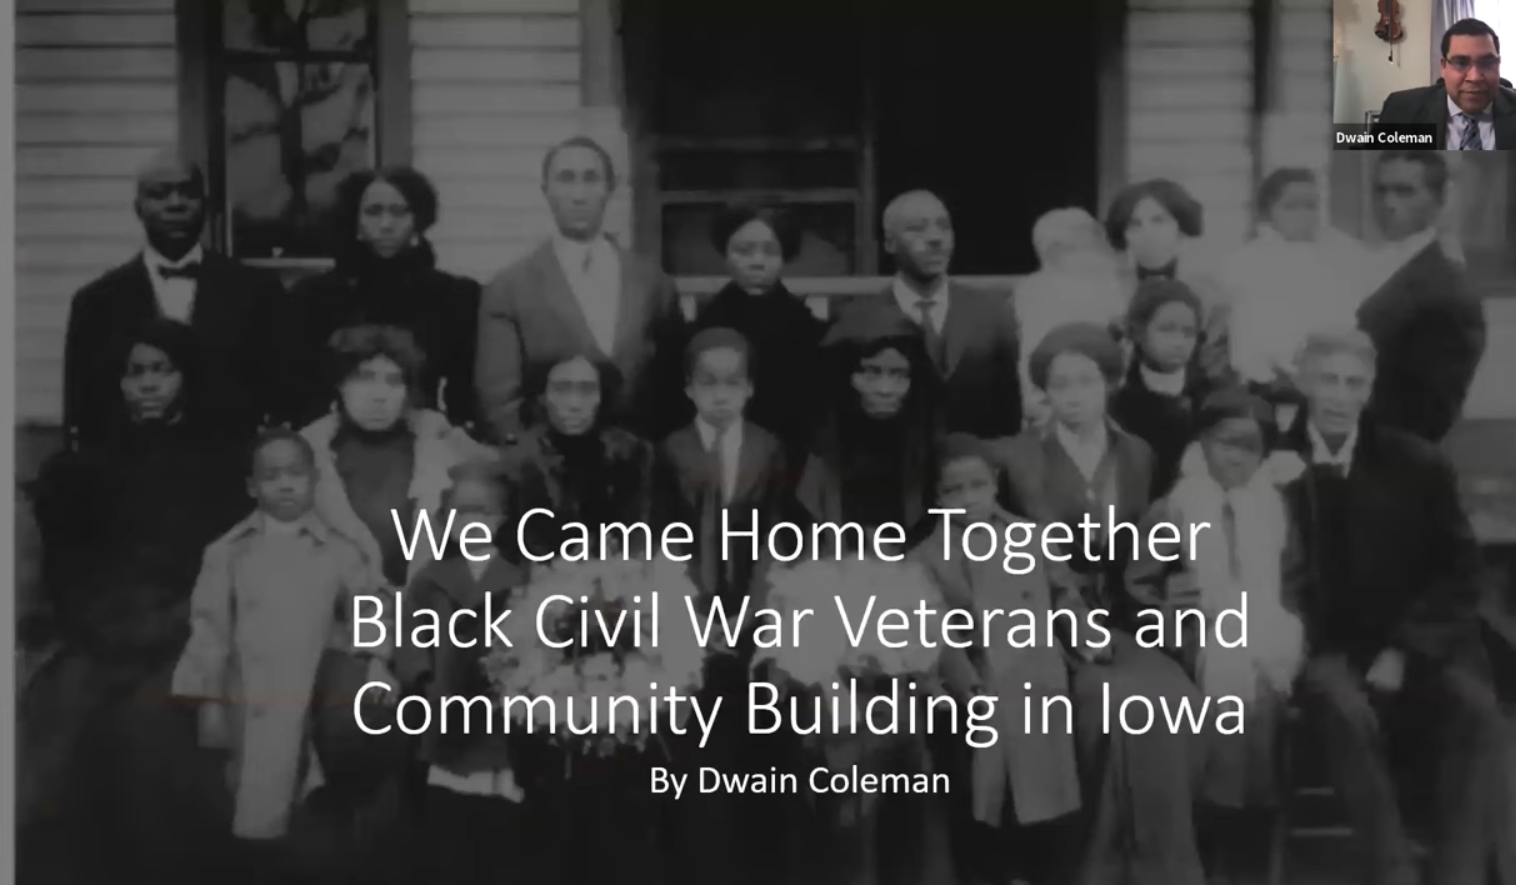 “We Came Home Together”: Black Civil War Veterans and Community Building in Iowa